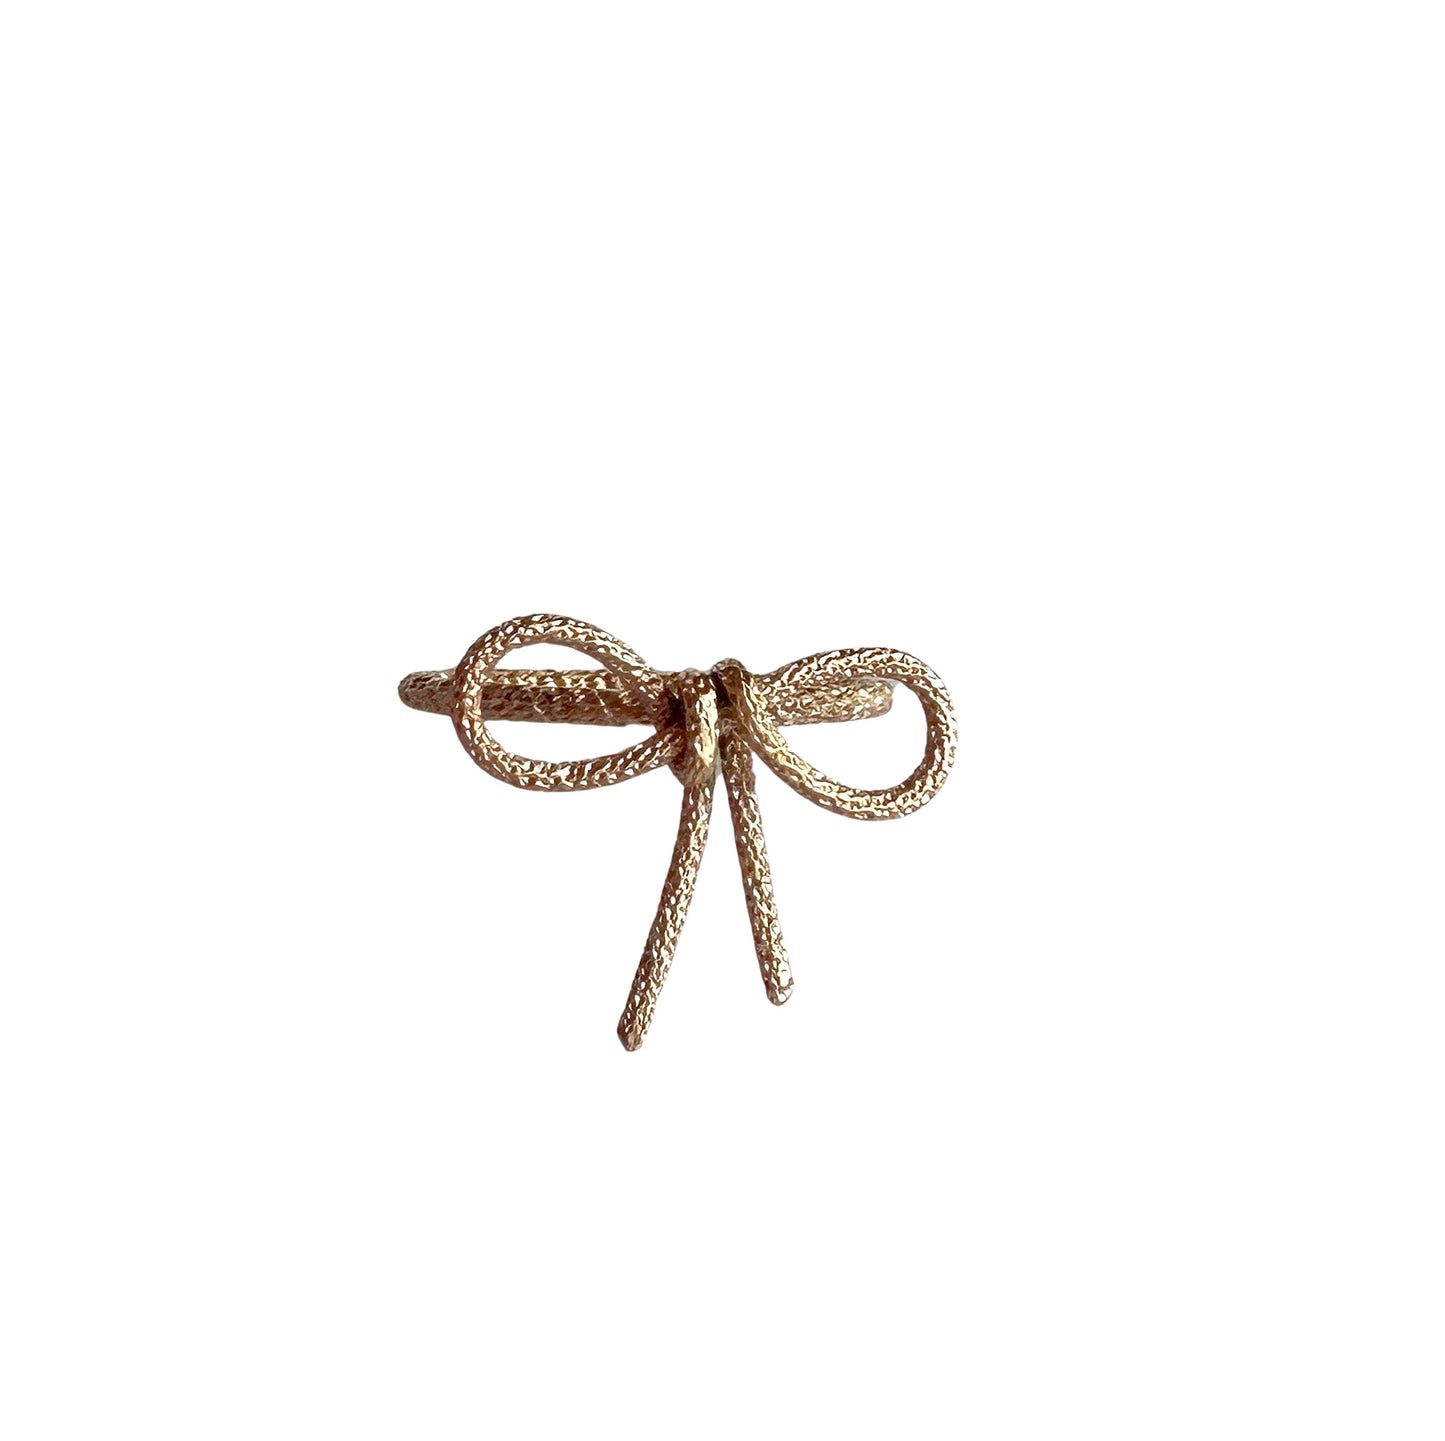 Gold bow ring made from textured wire formed into the shape of a ribbon or bow with 2 loops and 2 dangling ribbons 